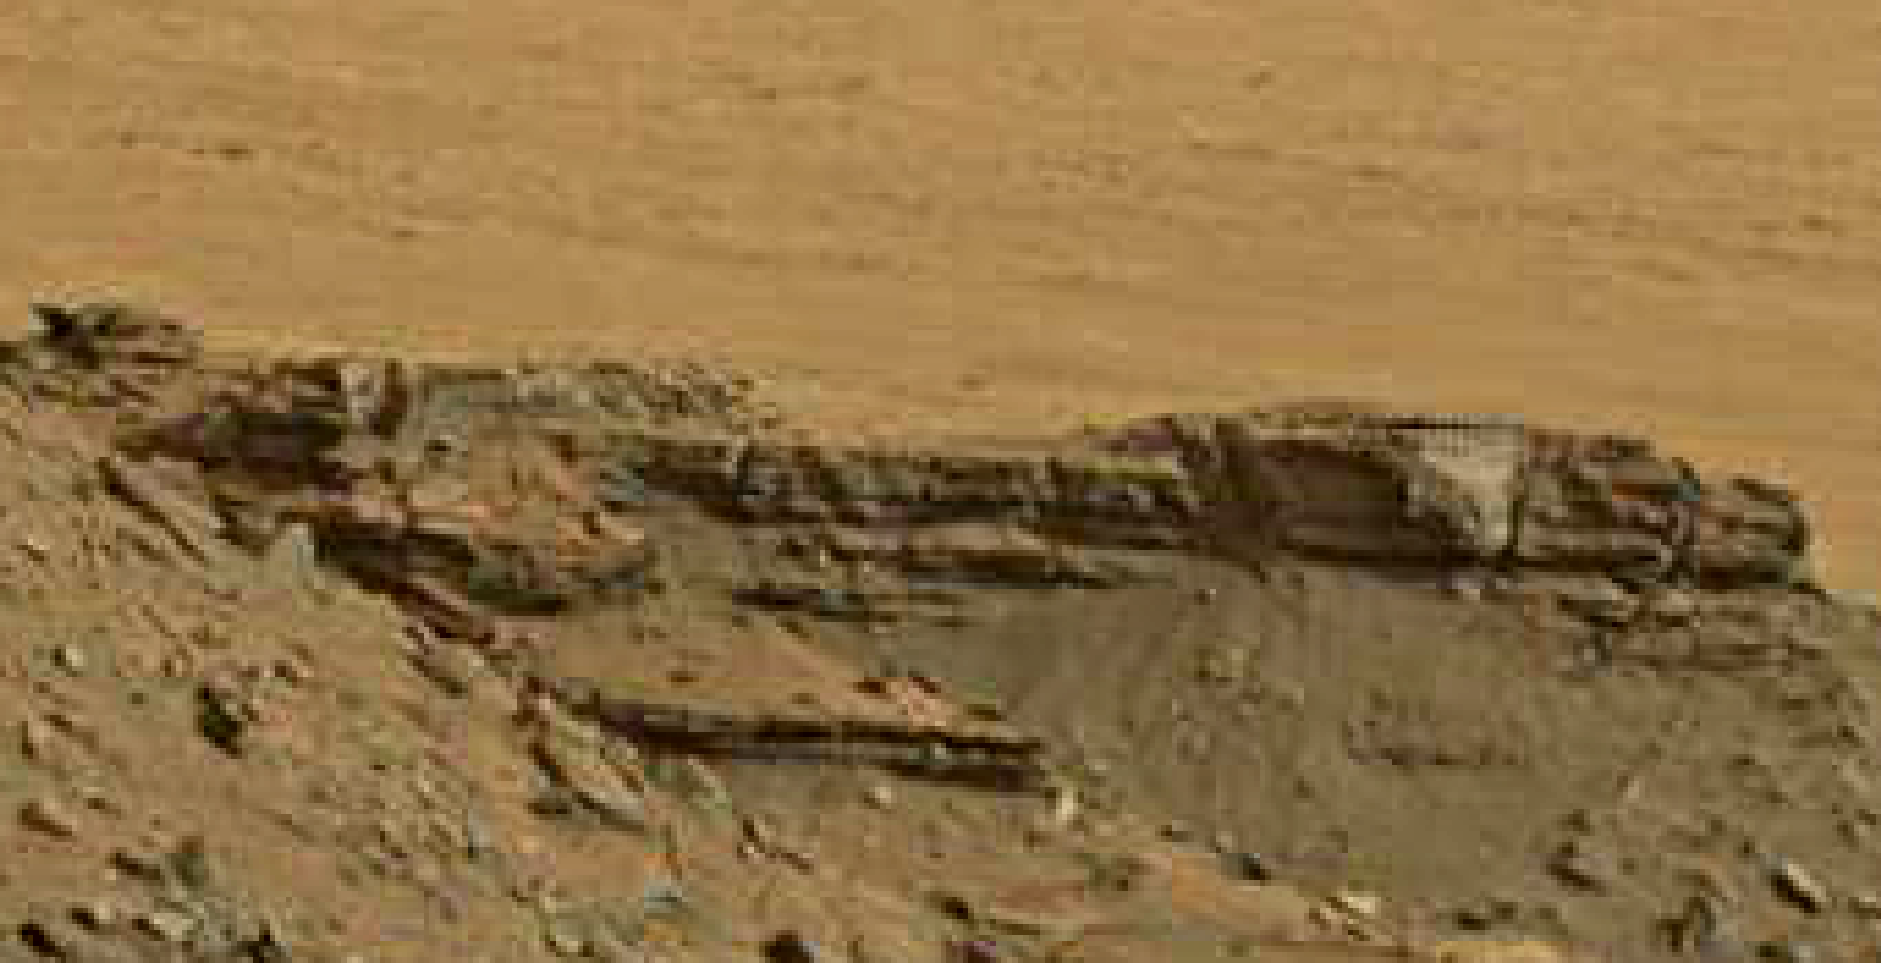 mars sol 1447 anomaly artifacts 3 -bird-plane-butte - was life on mars